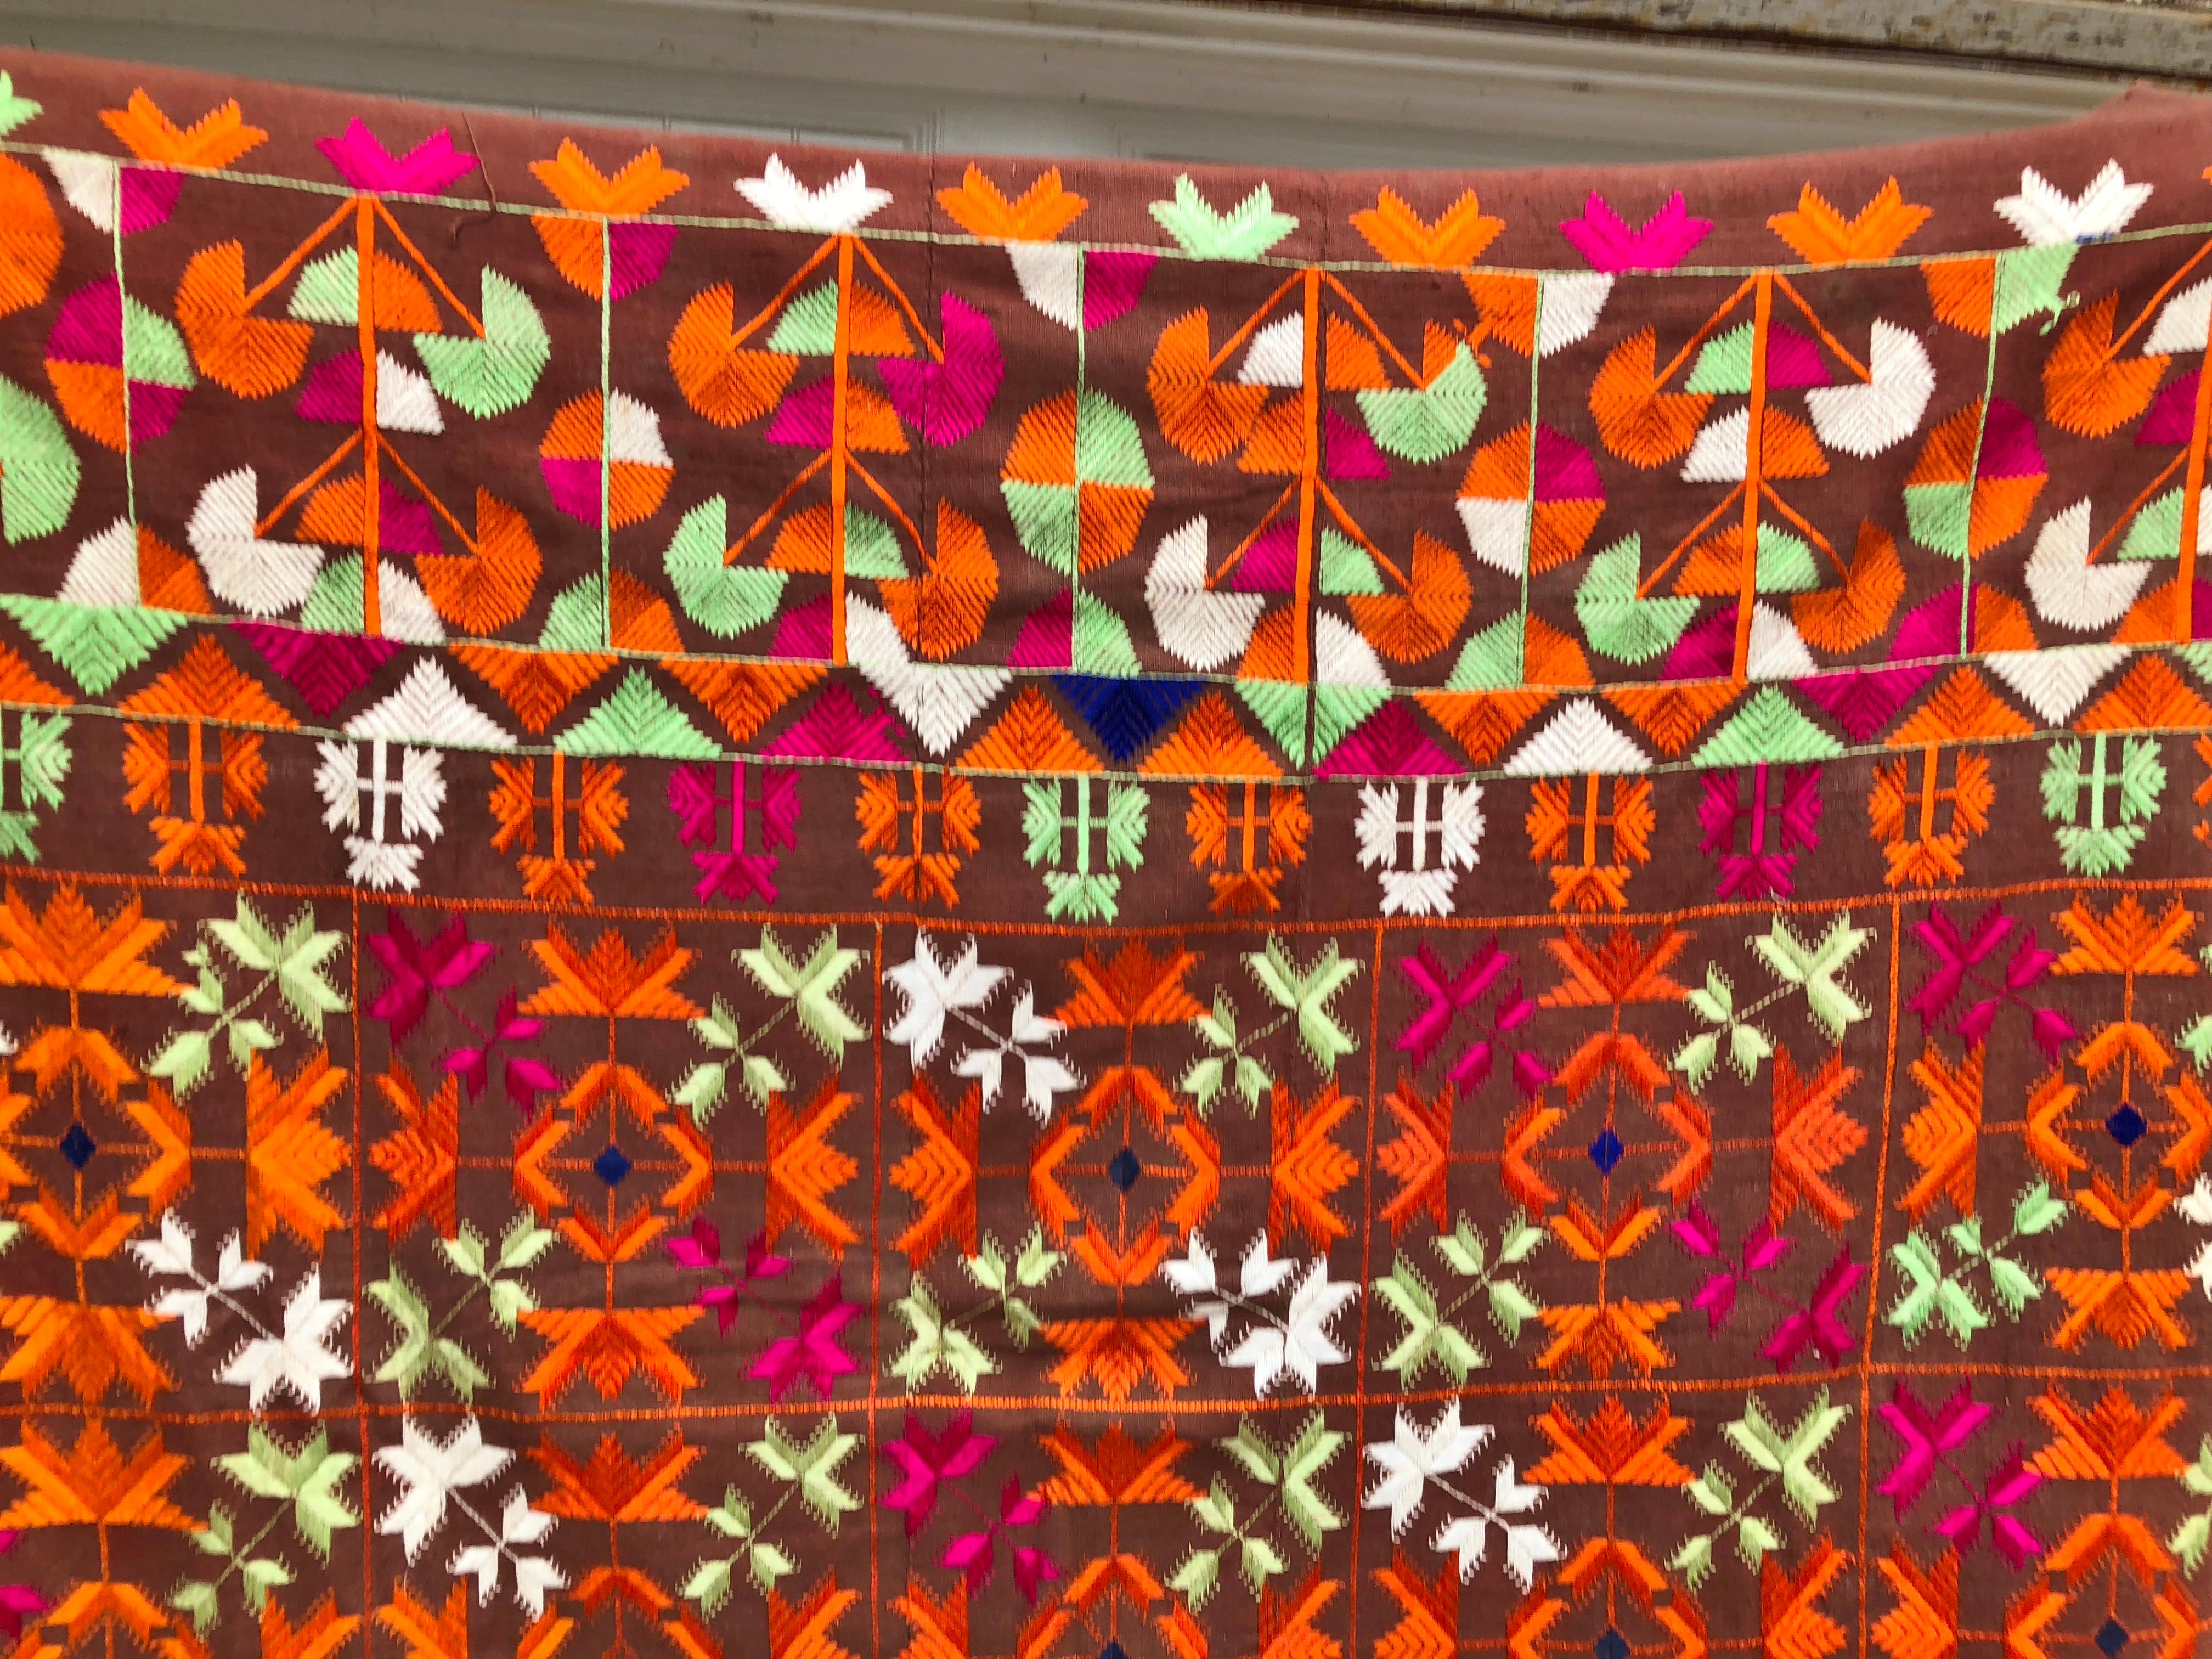 Vintage silk embroidered Phulkari wedding shawl from Punjab, India. The textile is handwoven cotton khadi cloth that is hand embroidered with vibrant silk threads by relatives of the young bride for her wedding and other special occasions. The shawl